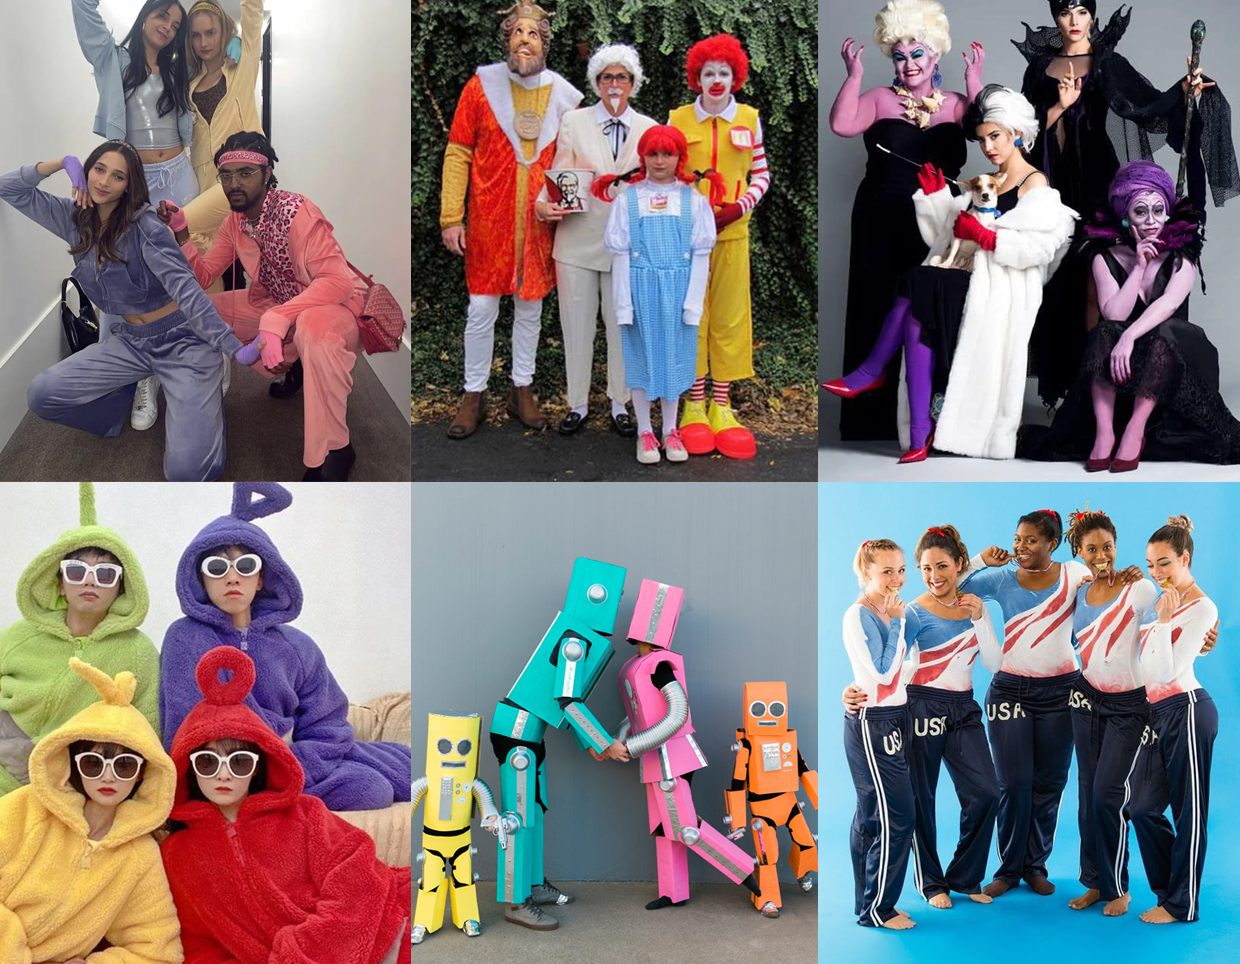 need inspo for scary halloween costume?? just go as one of these